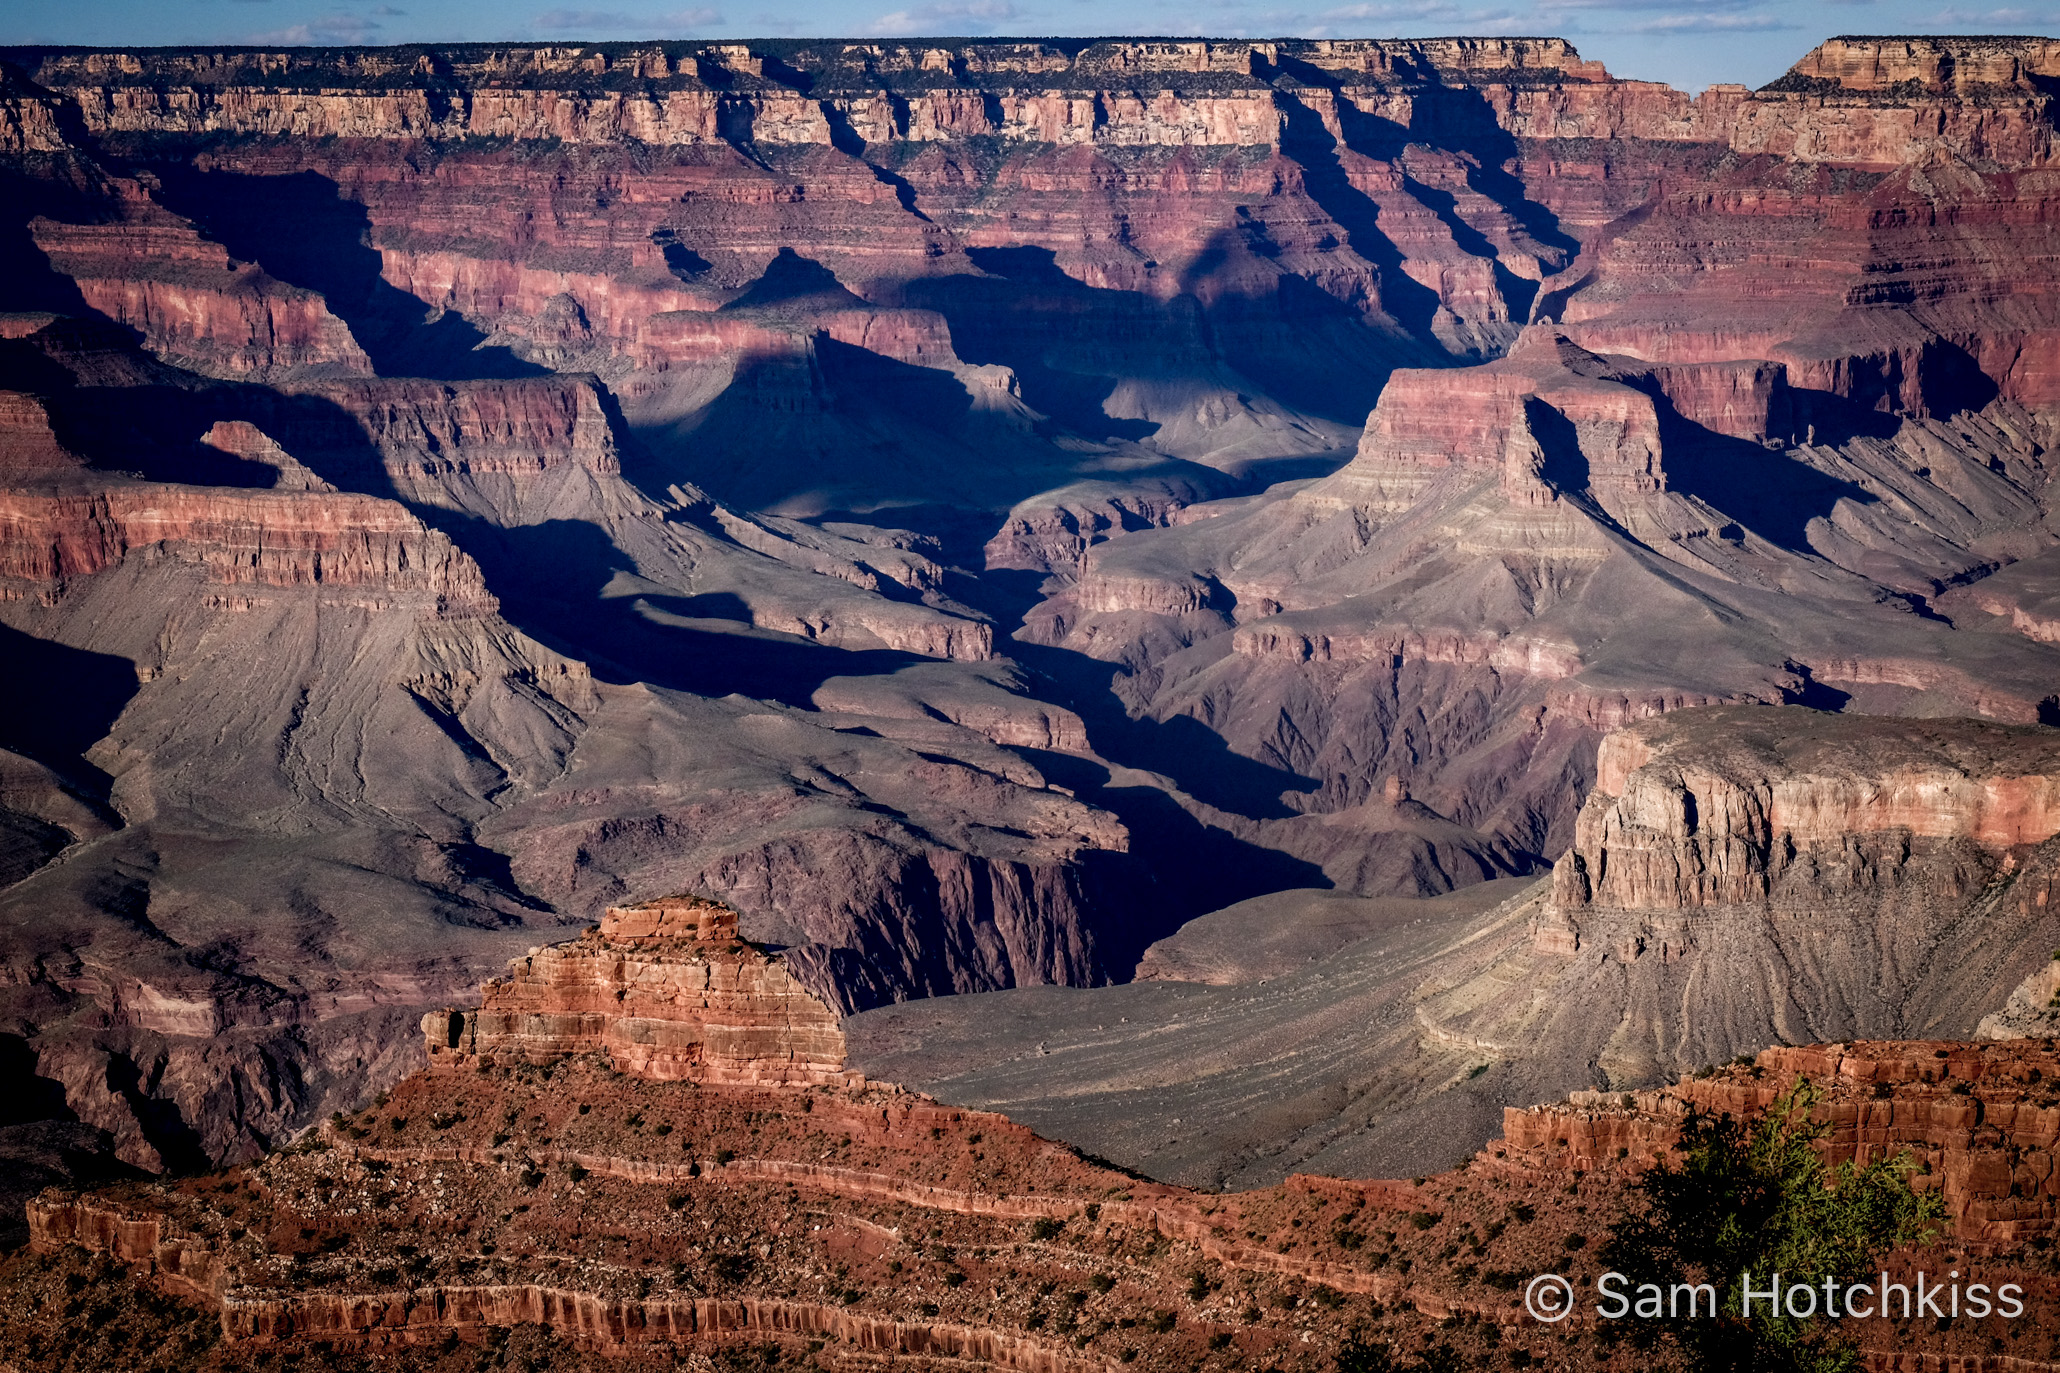 Afternoon Shadows in the Grand Canyon